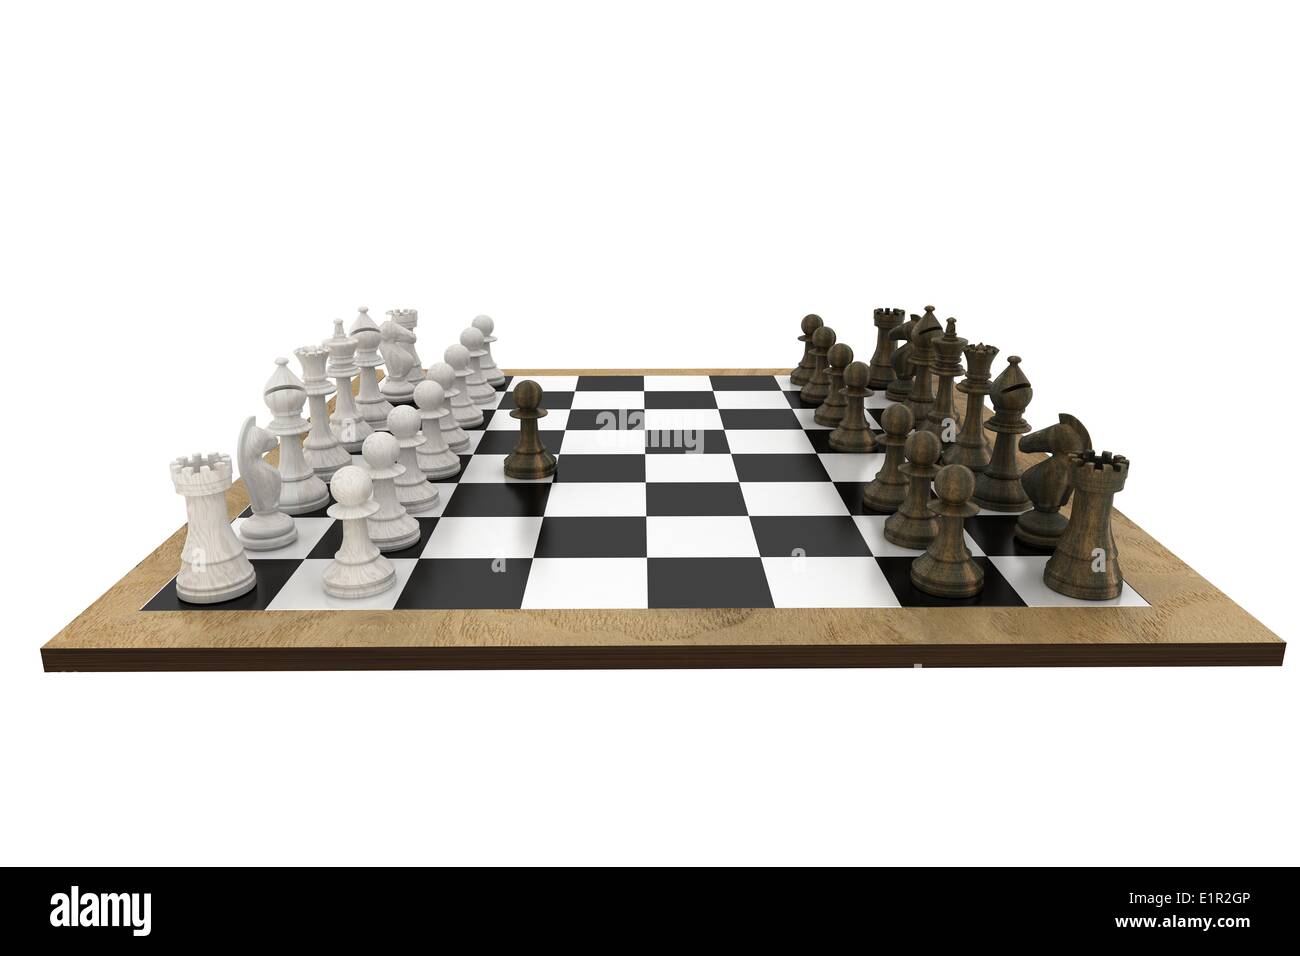 Chess pieces facing off on board Stock Photo